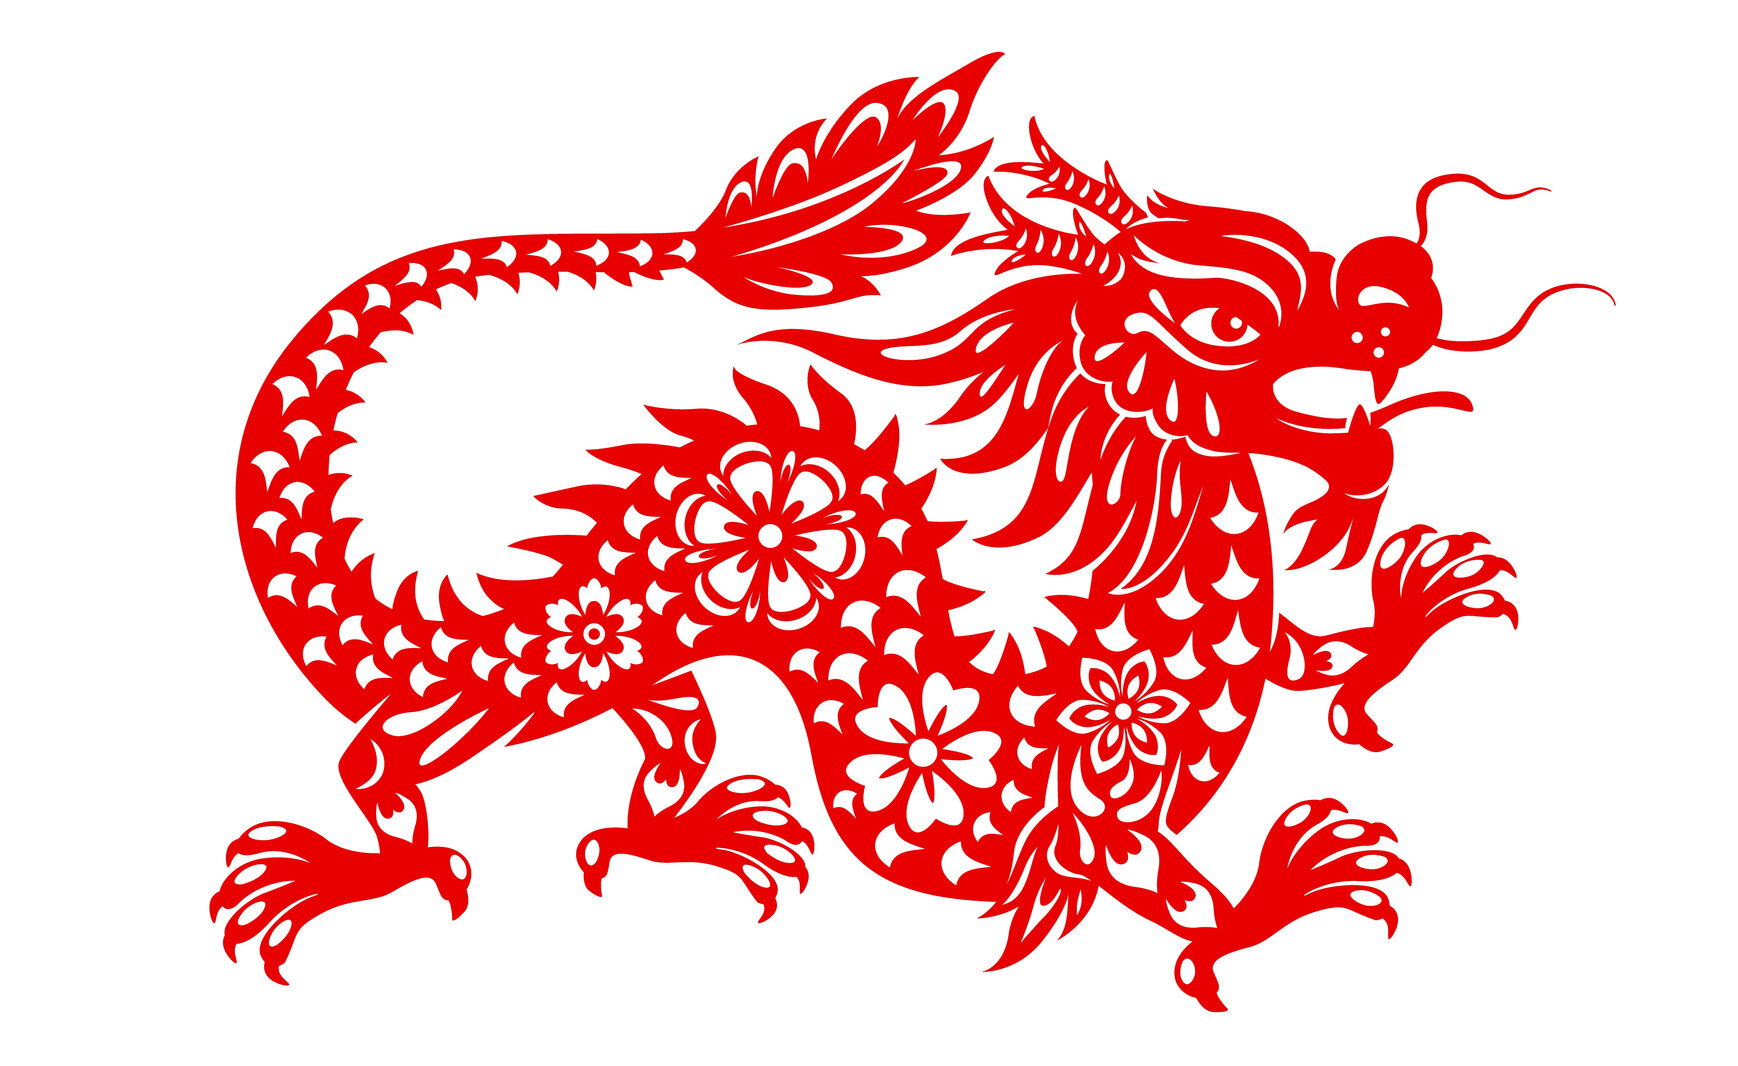 Chinese lunar new year dragon, zodiac sign and vector oriental holidays symbol. Red dragon in paper cut art for Chinese New Year festival, greeting card or lunar horoscope calendar